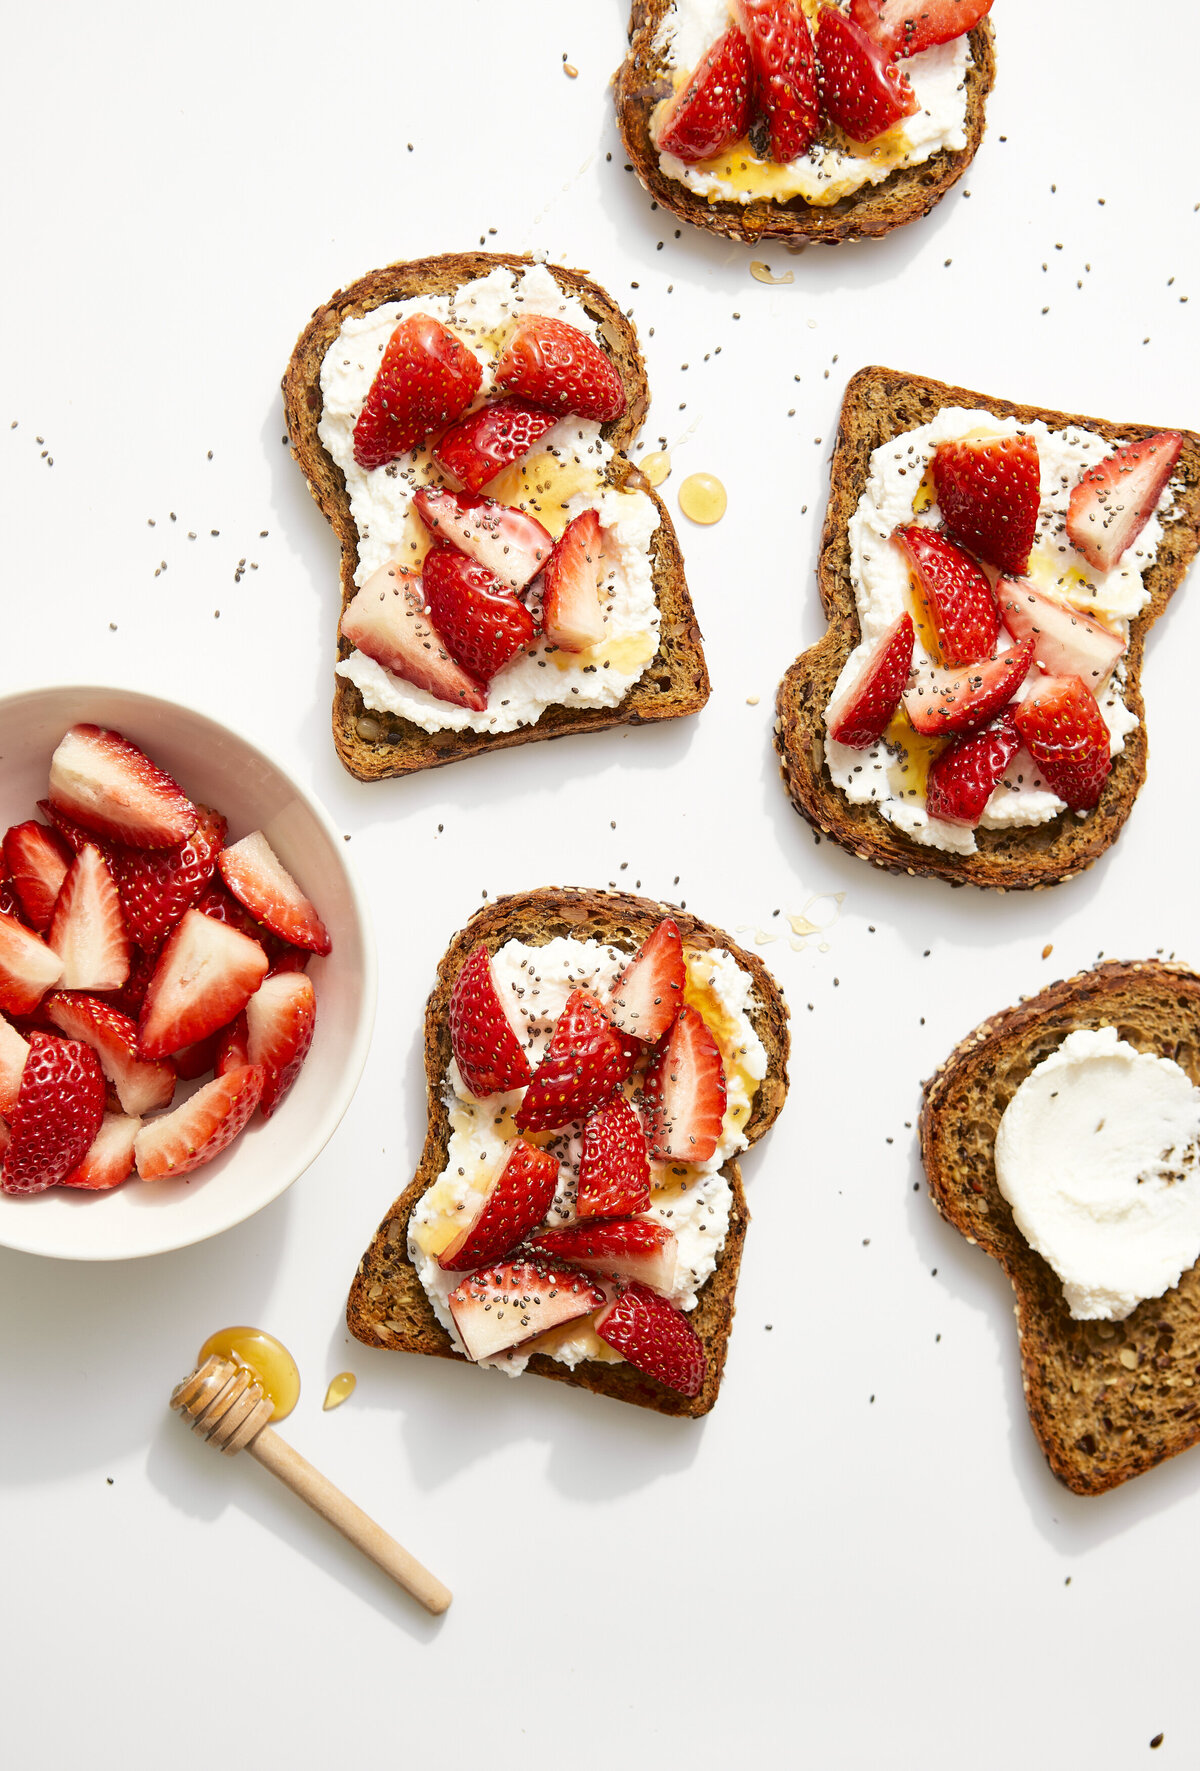 Slices of toast with ricotta cheese and strawberries on it.